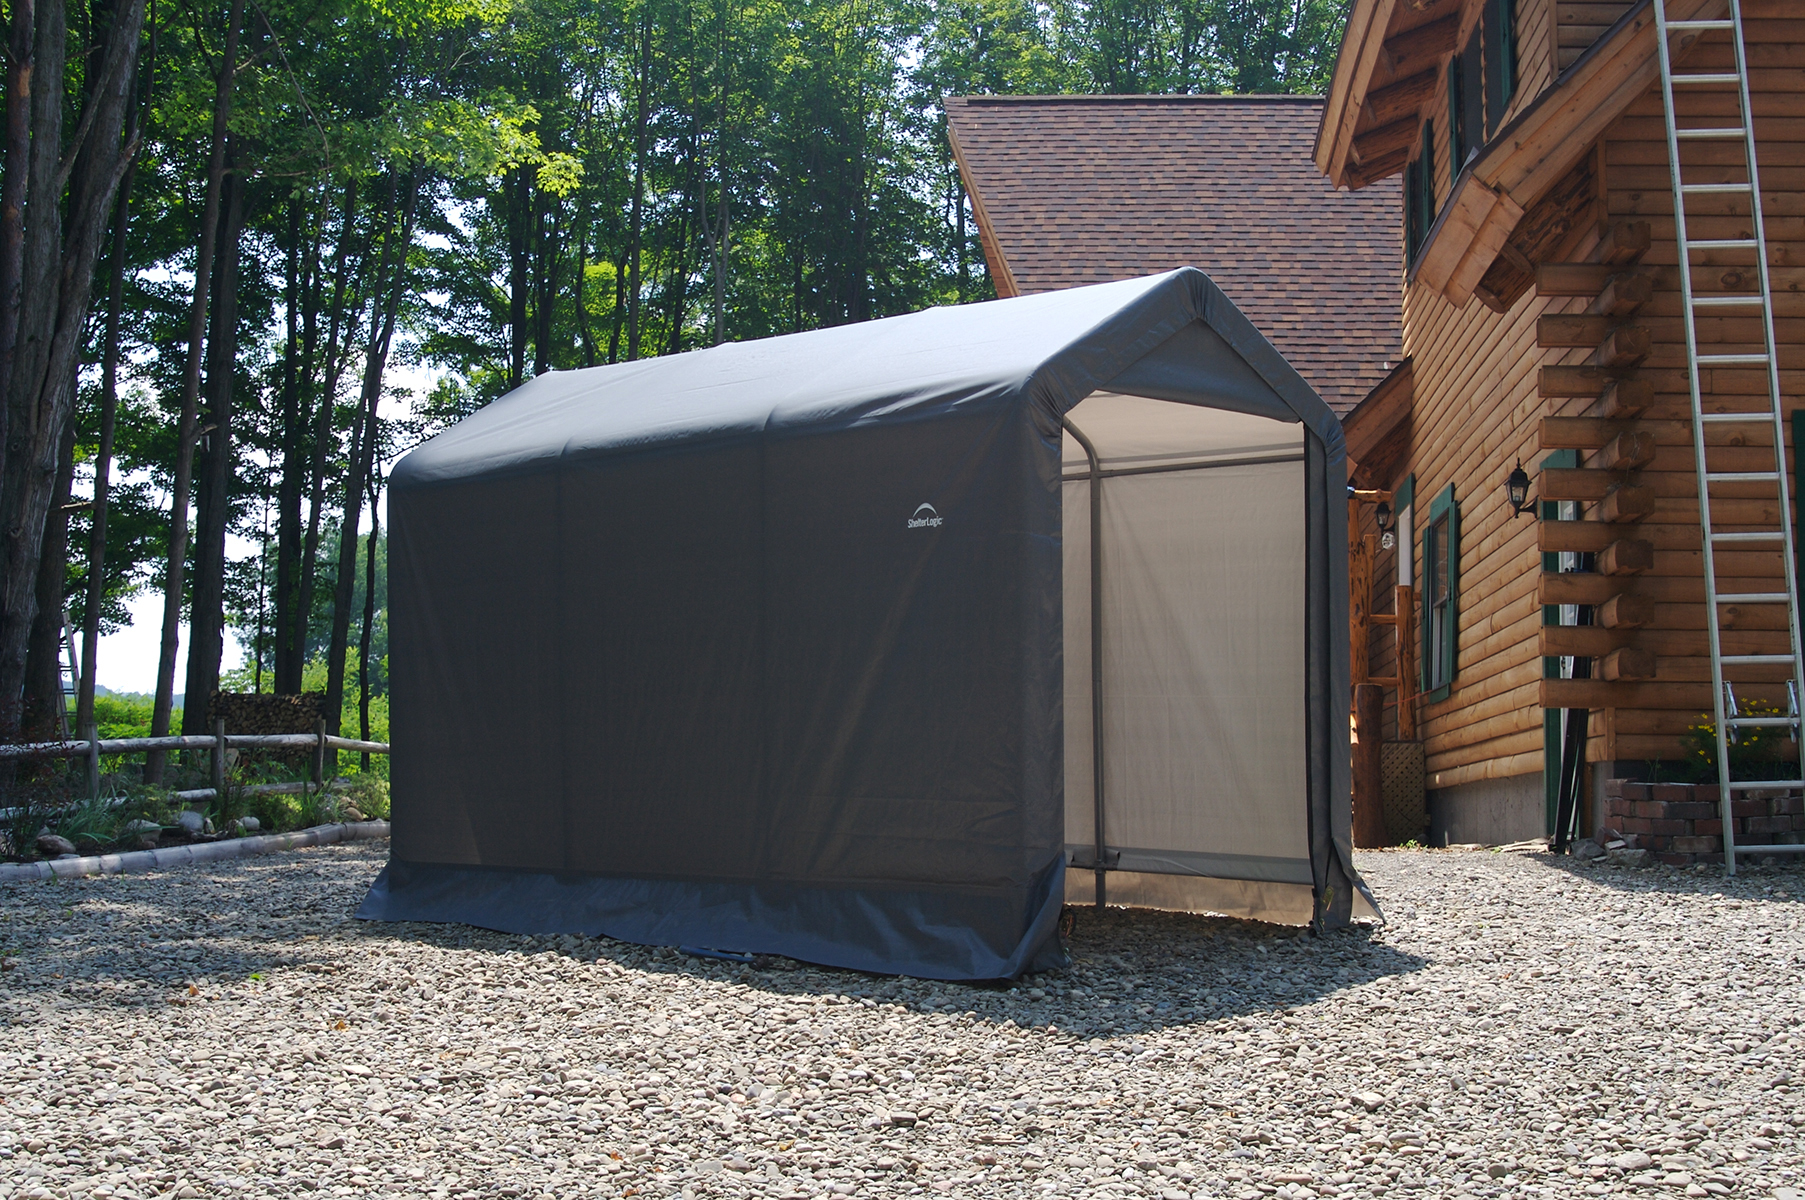 Shelterlogic Shed in a Box 8x8x8 Review | Shed in a Box Reviews &amp; Info